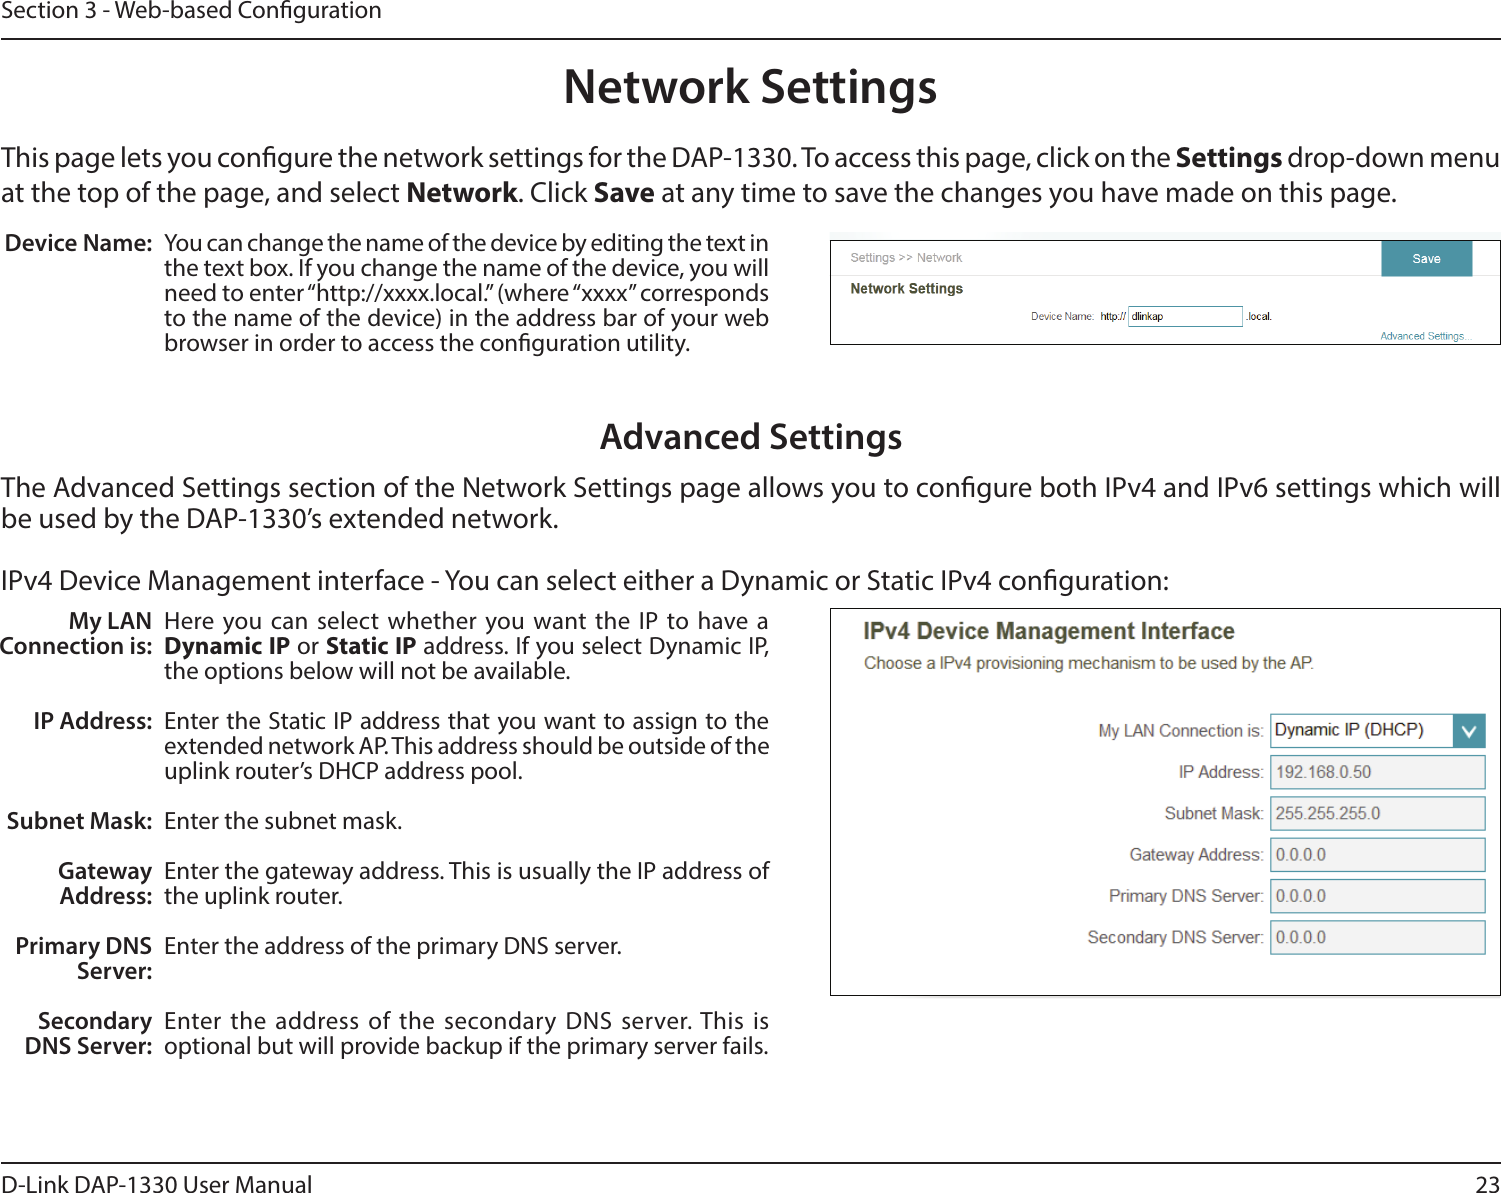 23D-Link DAP-1330 User ManualSection 3 - Web-based CongurationNetwork SettingsThis page lets you congure the network settings for the DAP-1330. To access this page, click on the Settings drop-down menu at the top of the page, and select Network. Click Save at any time to save the changes you have made on this page.Device Name: You can change the name of the device by editing the text in the text box. If you change the name of the device, you will need to enter “http://xxxx.local.” (where “xxxx” corresponds to the name of the device) in the address bar of your web browser in order to access the conguration utility. Advanced SettingsThe Advanced Settings section of the Network Settings page allows you to congure both IPv4 and IPv6 settings which will be used by the DAP-1330’s extended network. IPv4 Device Management interface - You can select either a Dynamic or Static IPv4 conguration:My LAN Connection is:IP Address:Subnet Mask:Gateway Address:Primary DNS Server:Secondary DNS Server:Here you can select whether you want the IP to have a Dynamic IP or Static IP address. If you select Dynamic IP, the options below will not be available. Enter the Static IP address that you want to assign to the extended network AP. This address should be outside of the uplink router’s DHCP address pool. Enter the subnet mask.Enter the gateway address. This is usually the IP address of the uplink router. Enter the address of the primary DNS server.Enter the address of the secondary DNS server. This is optional but will provide backup if the primary server fails. 